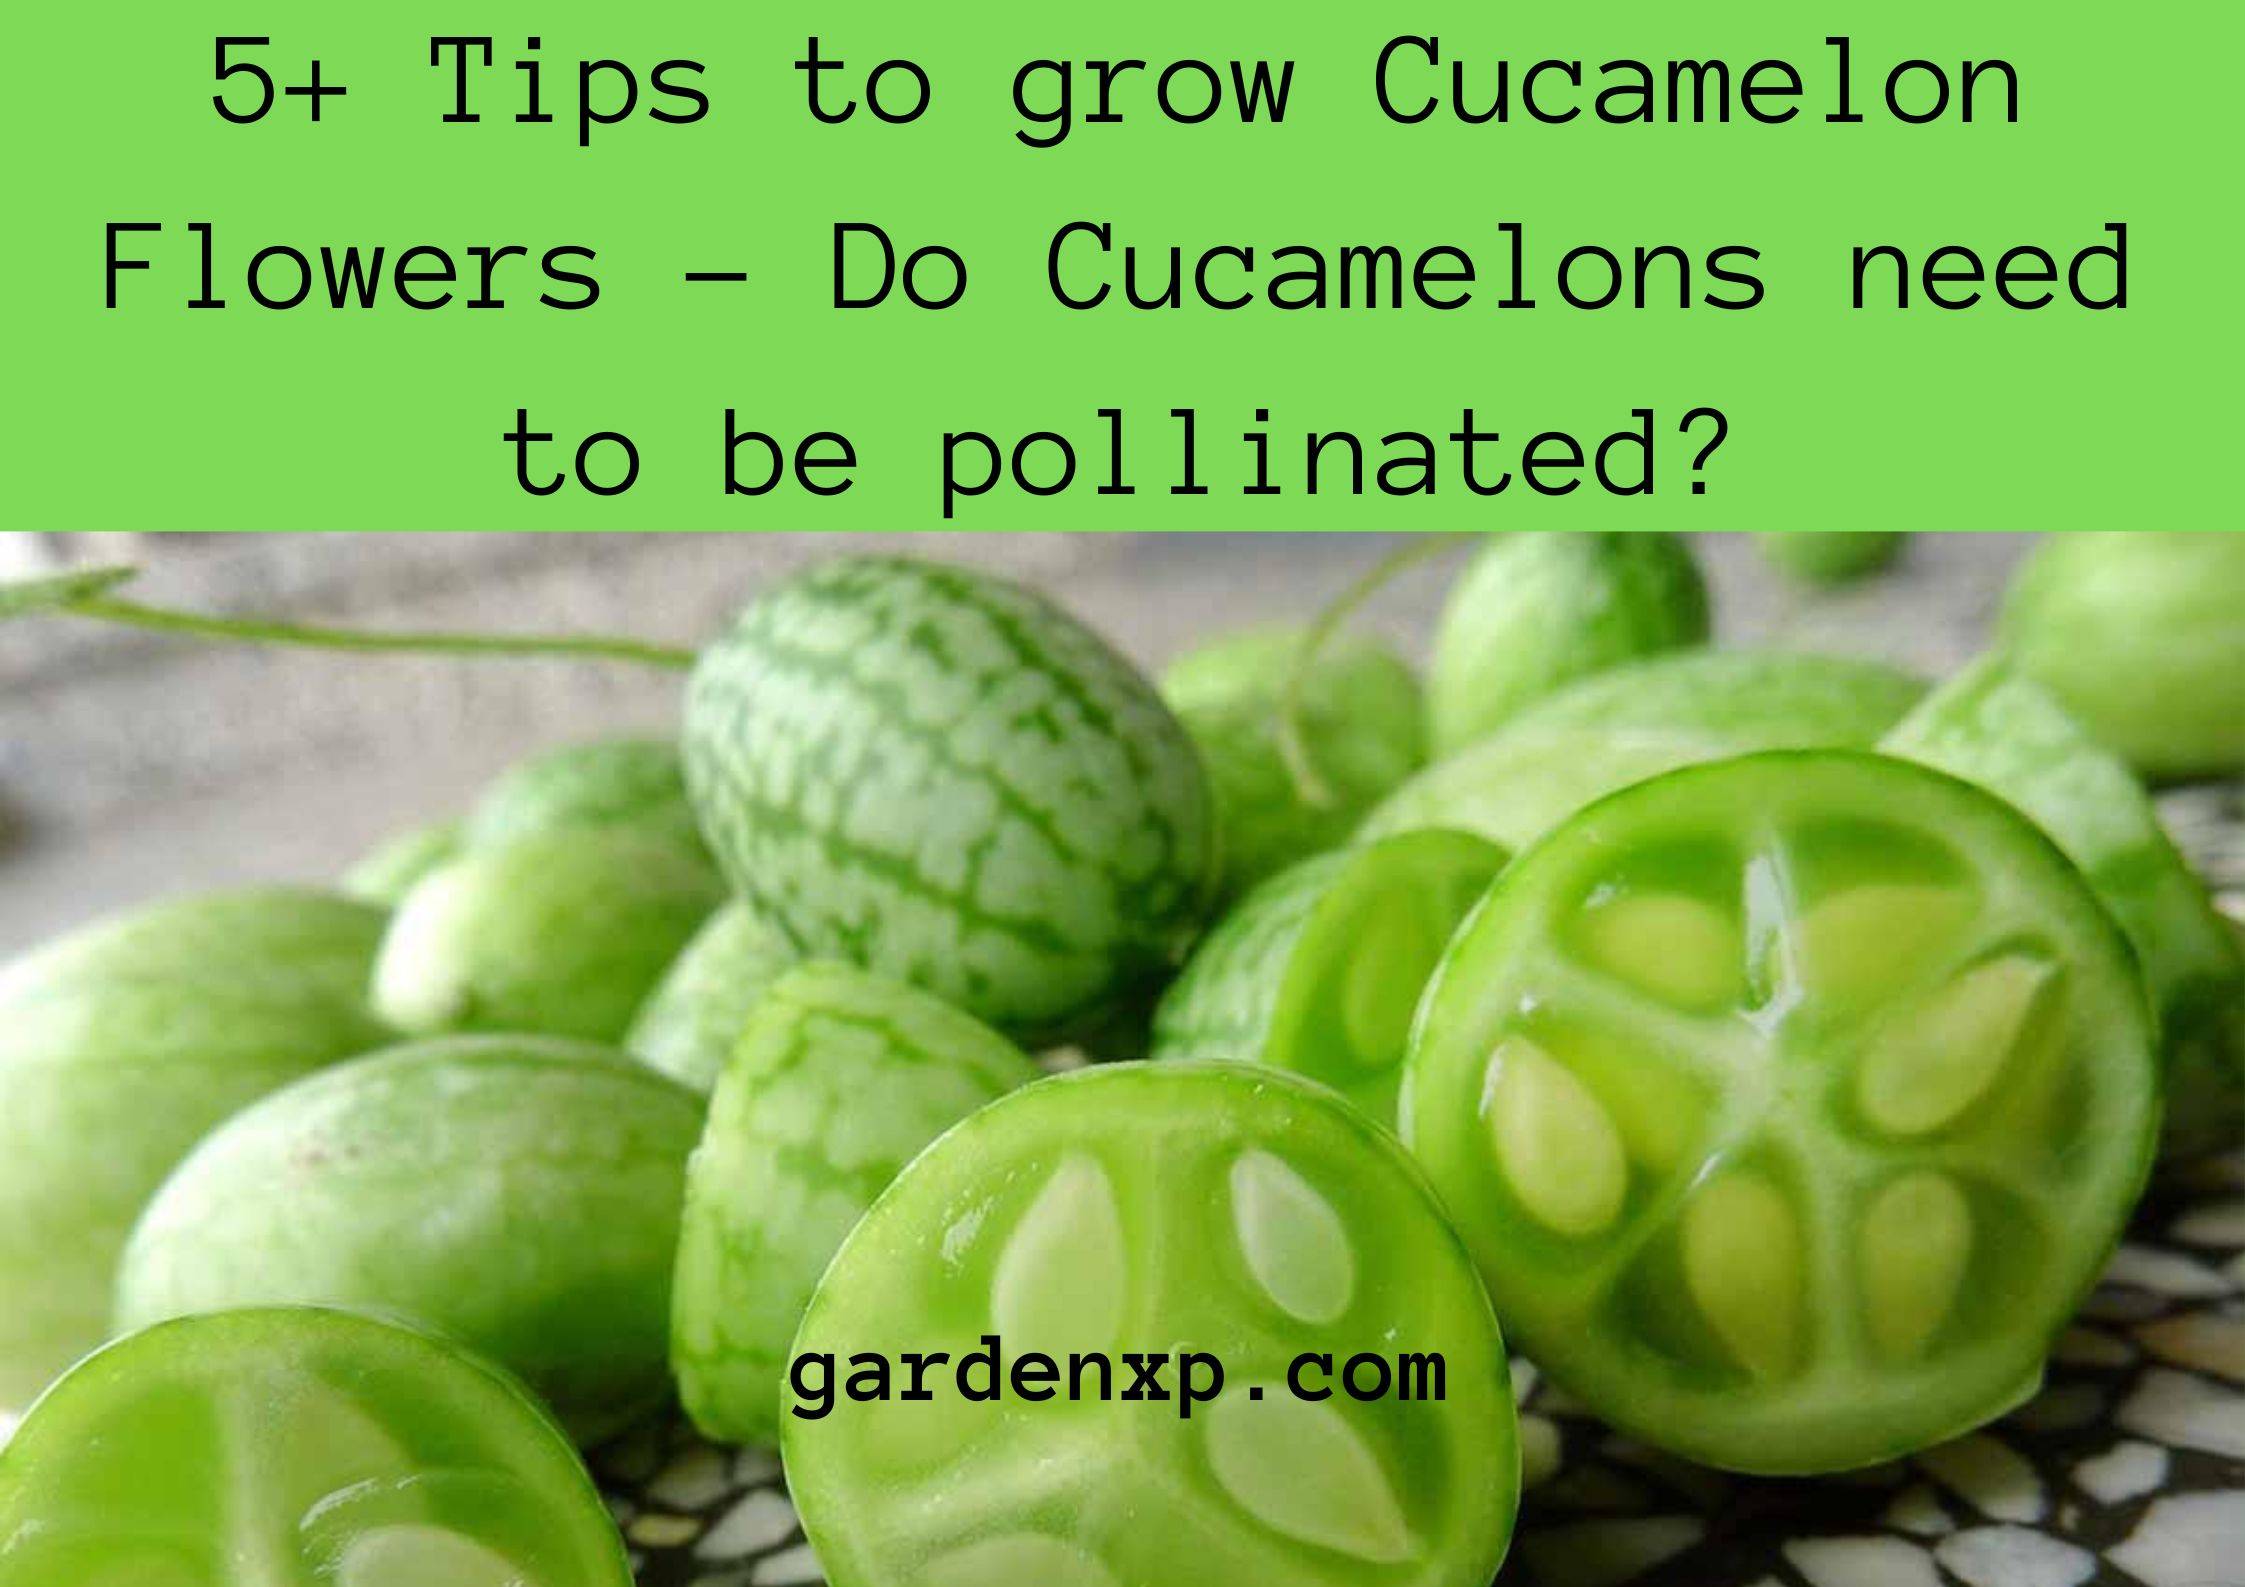 5+ Tips to grow Cucamelon Flowers - Do Cucamelons need to be pollinated?